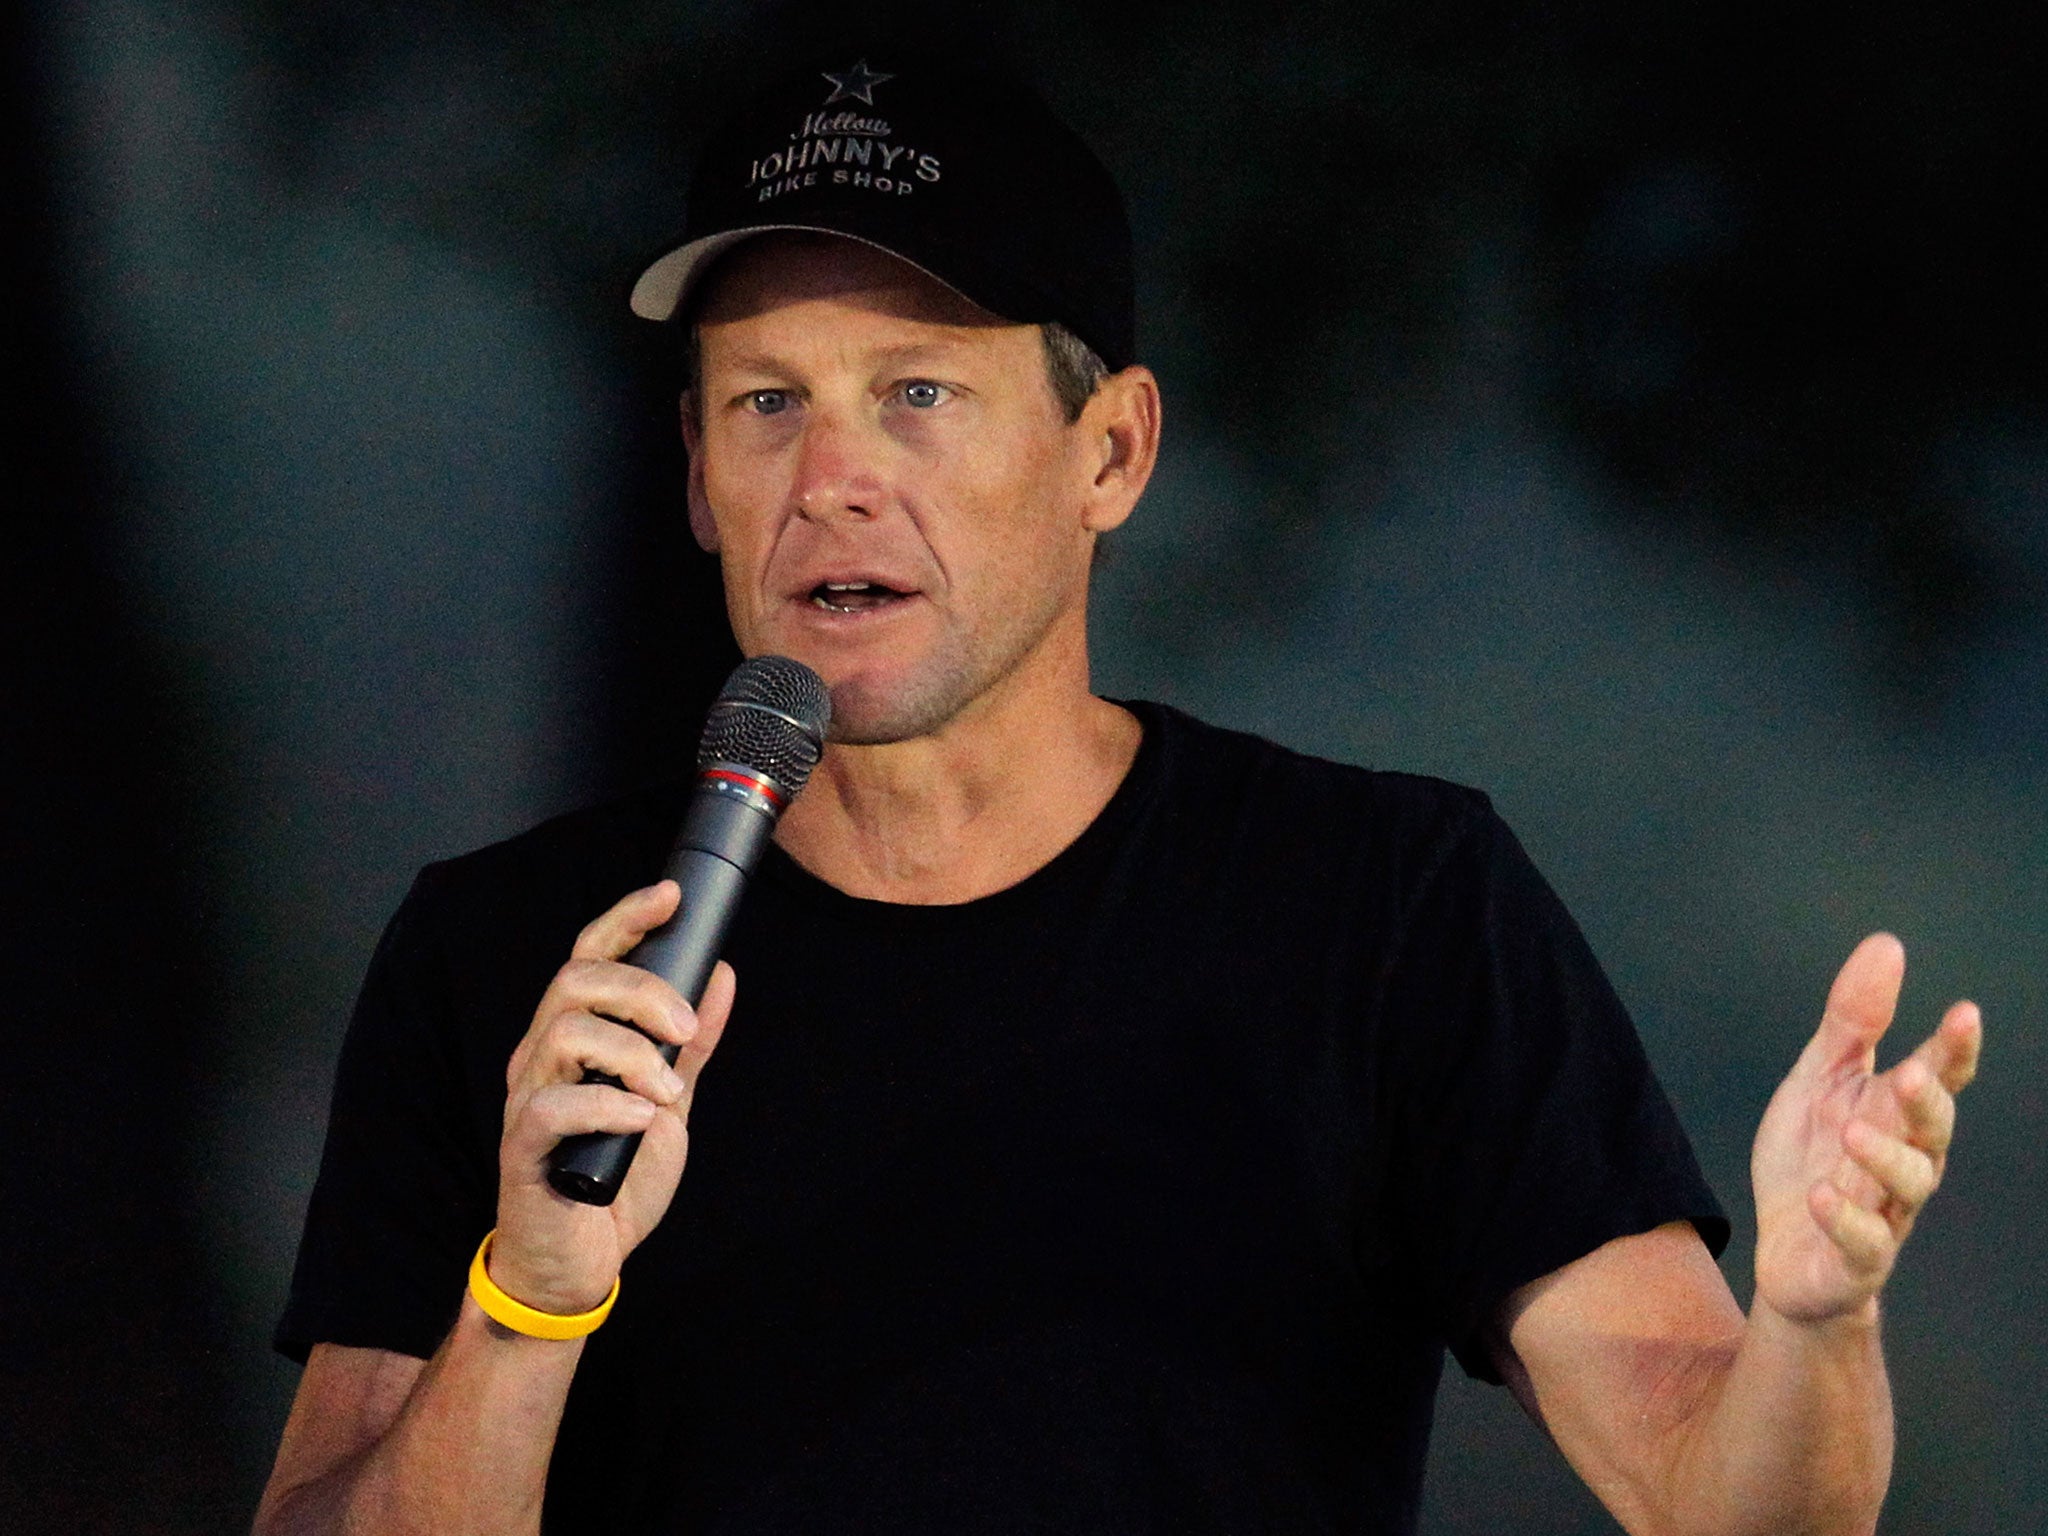 Lance Armstrong was caught using banned substances